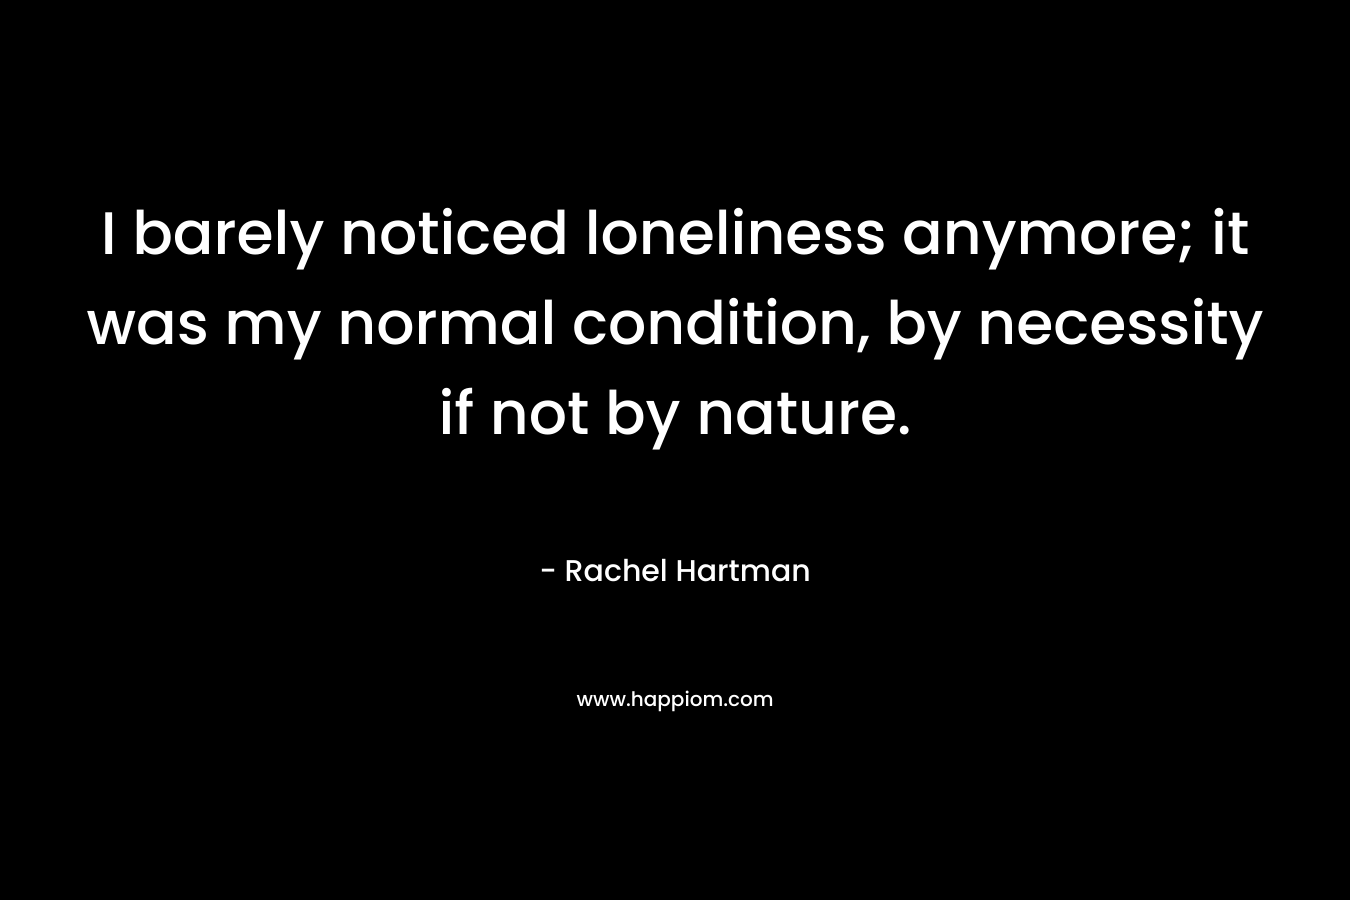 I barely noticed loneliness anymore; it was my normal condition, by necessity if not by nature.